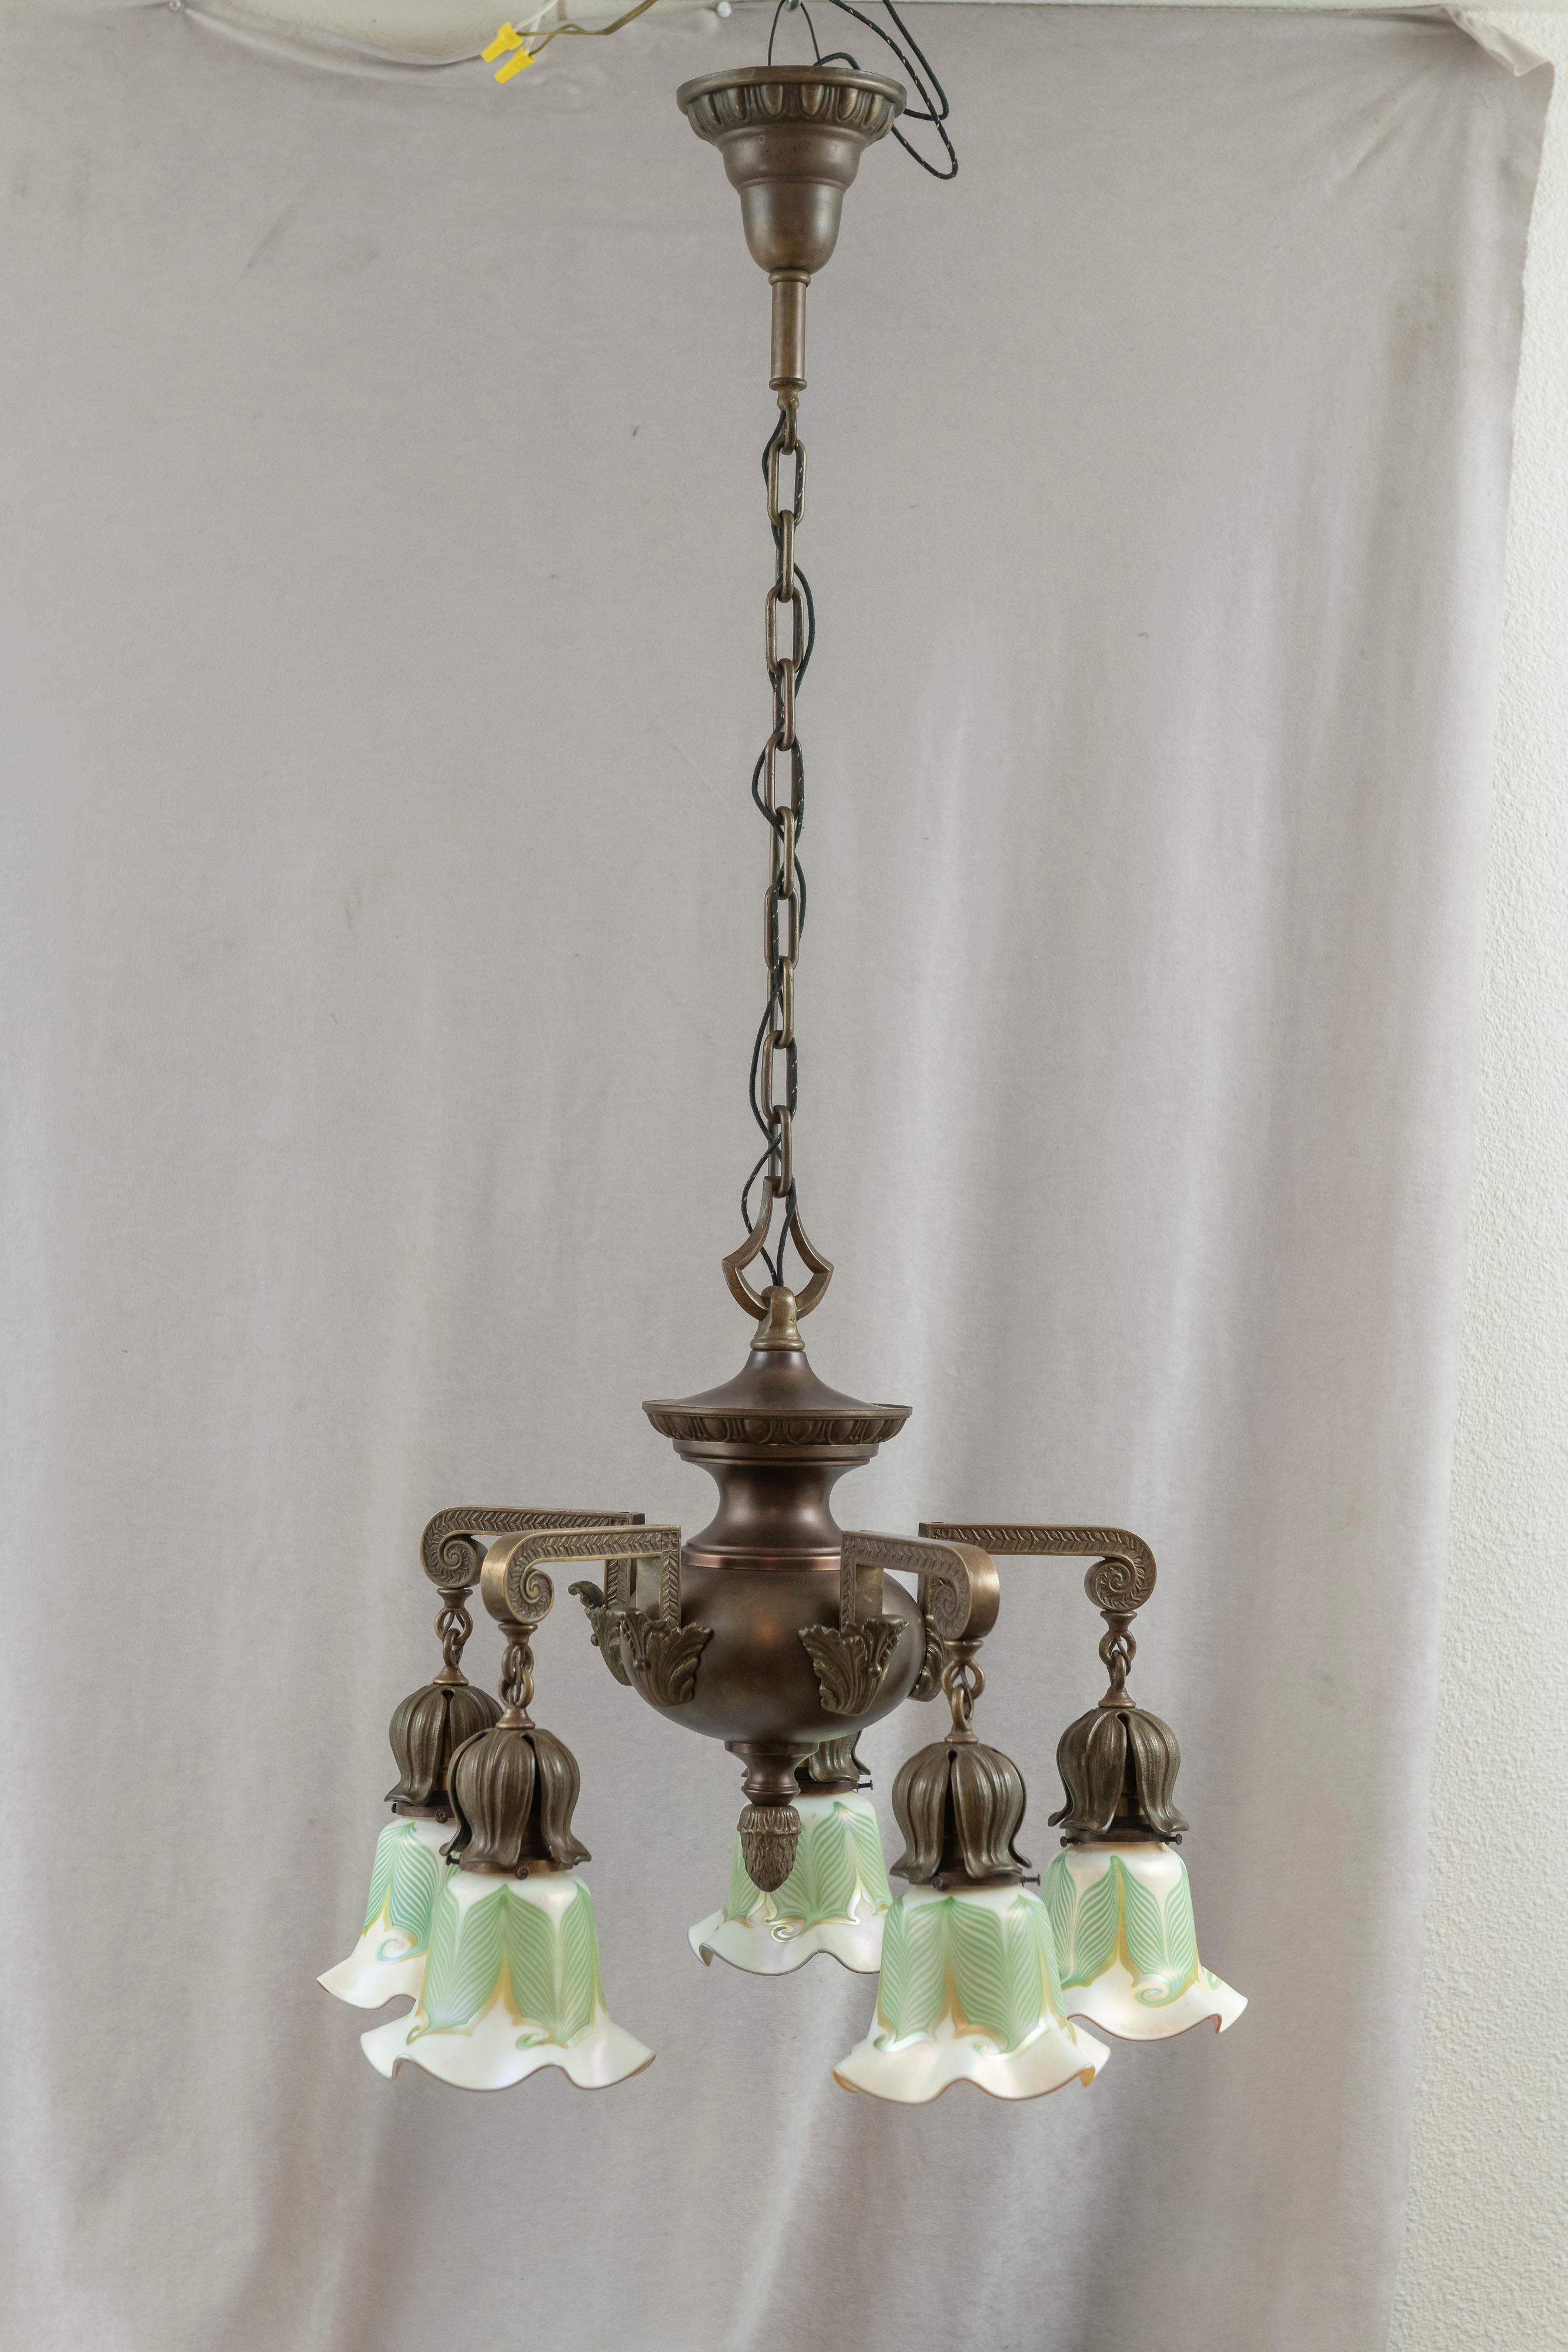 This very handsome quality bronze chandelier is complimented by 5 signed Quezal hand blown art glass shades. The chandelier is surprisingly heavy, mainly because most of the parts are cast bronze. The husks which cover the sockets are thick cast